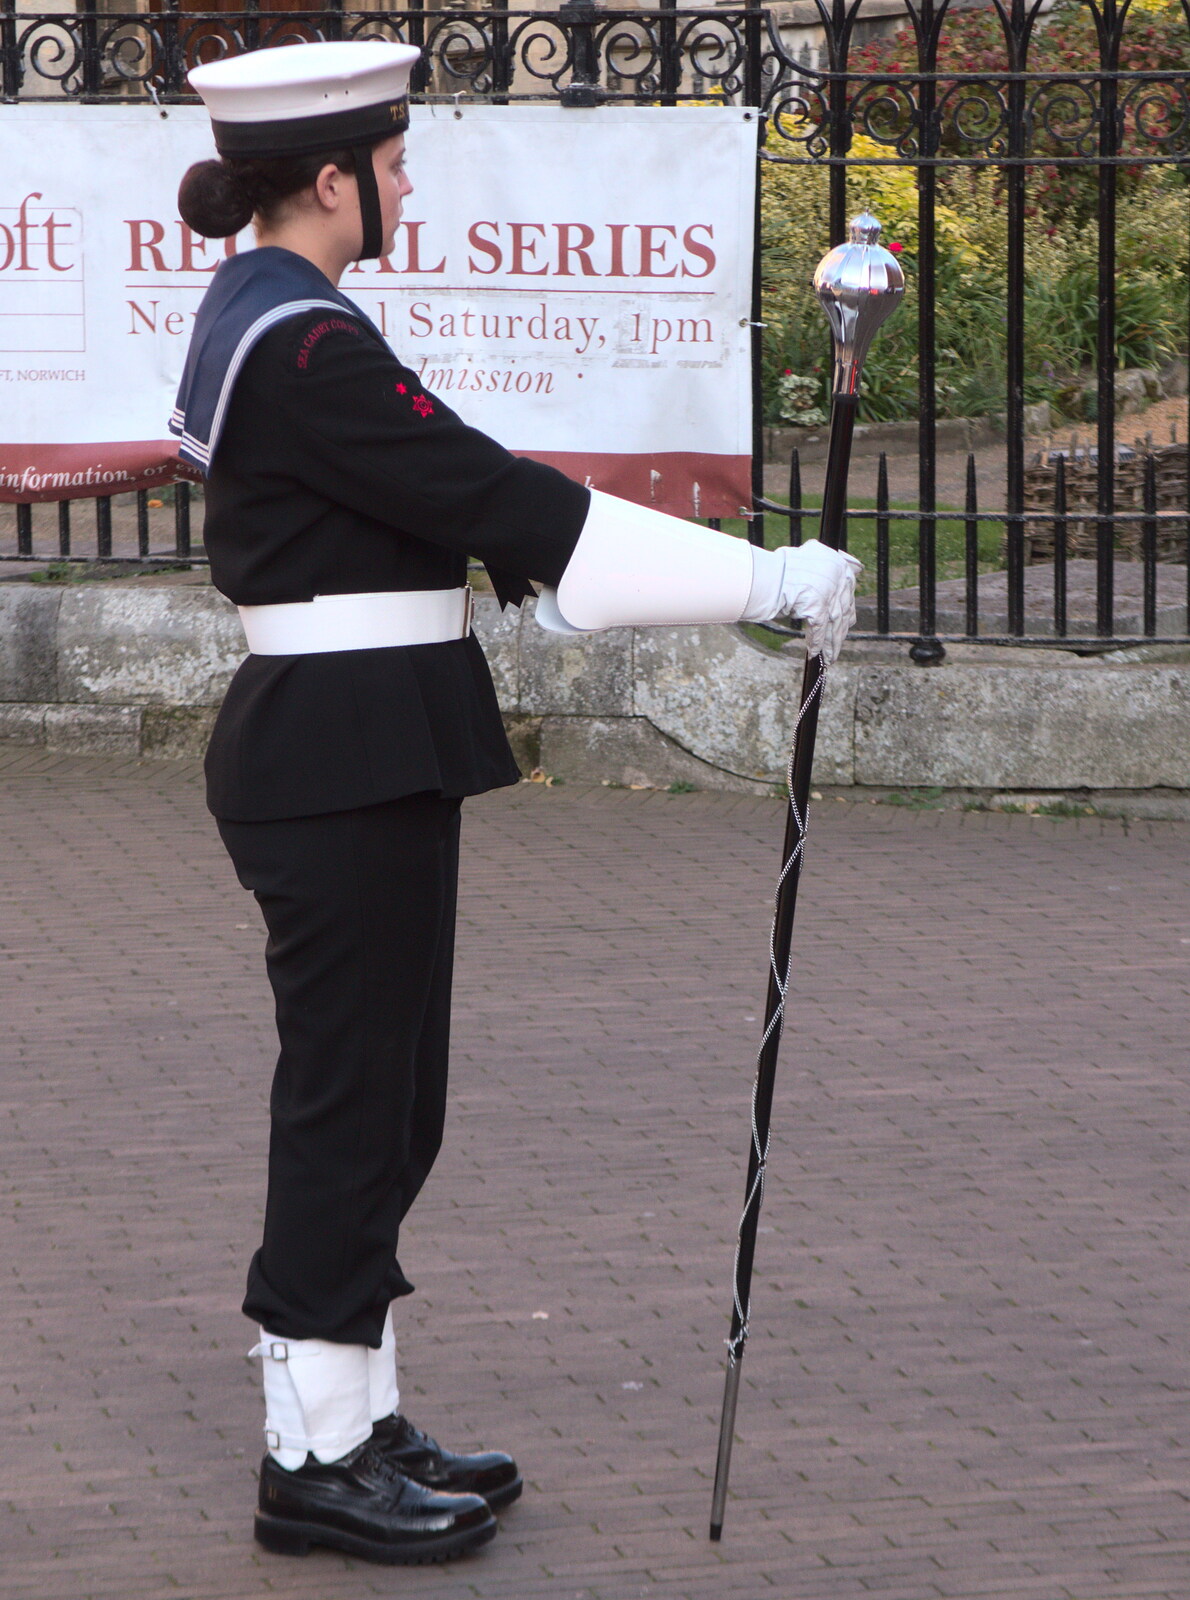 A band cadet with a mace from Trafalgar Day and Pizza, Norwich, Norfolk - 15th October 2017